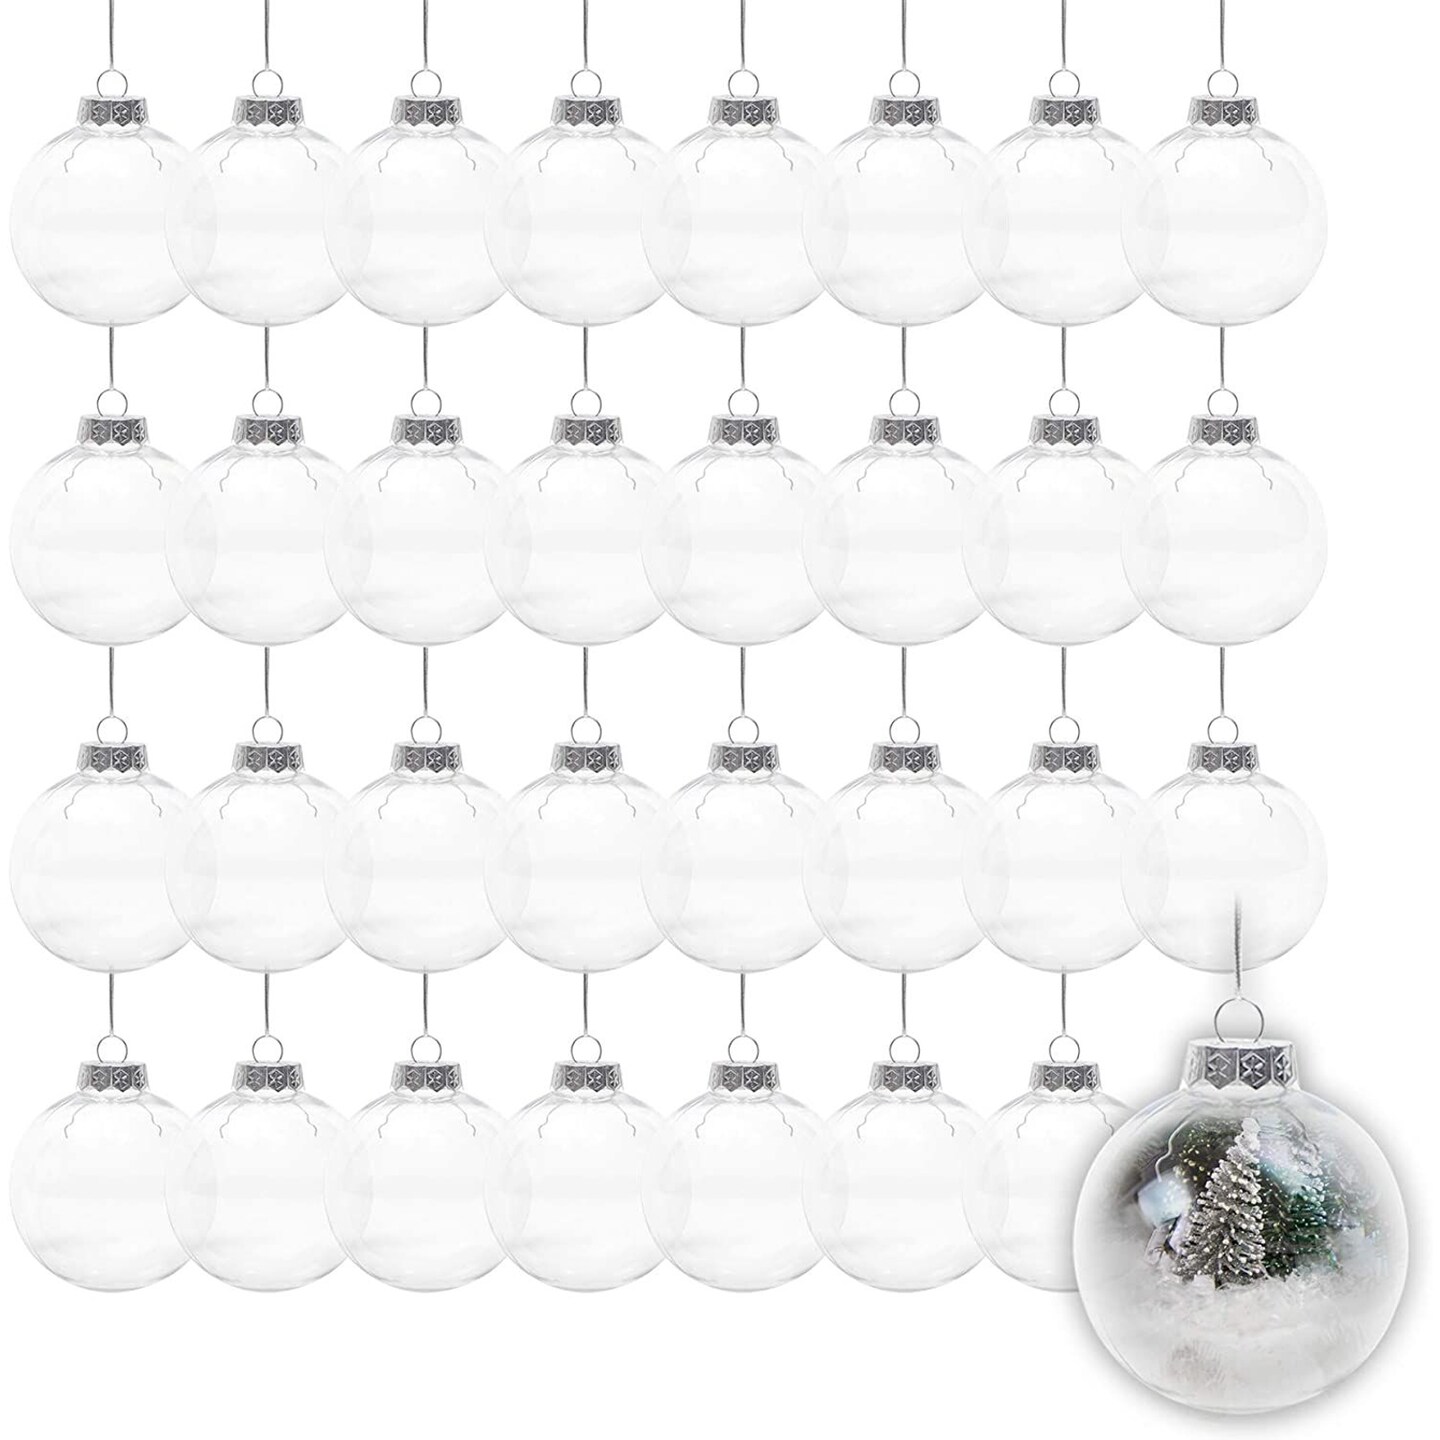 12 Art Minds 3 Clear Fillable Disk Ornaments Christmas Holiday